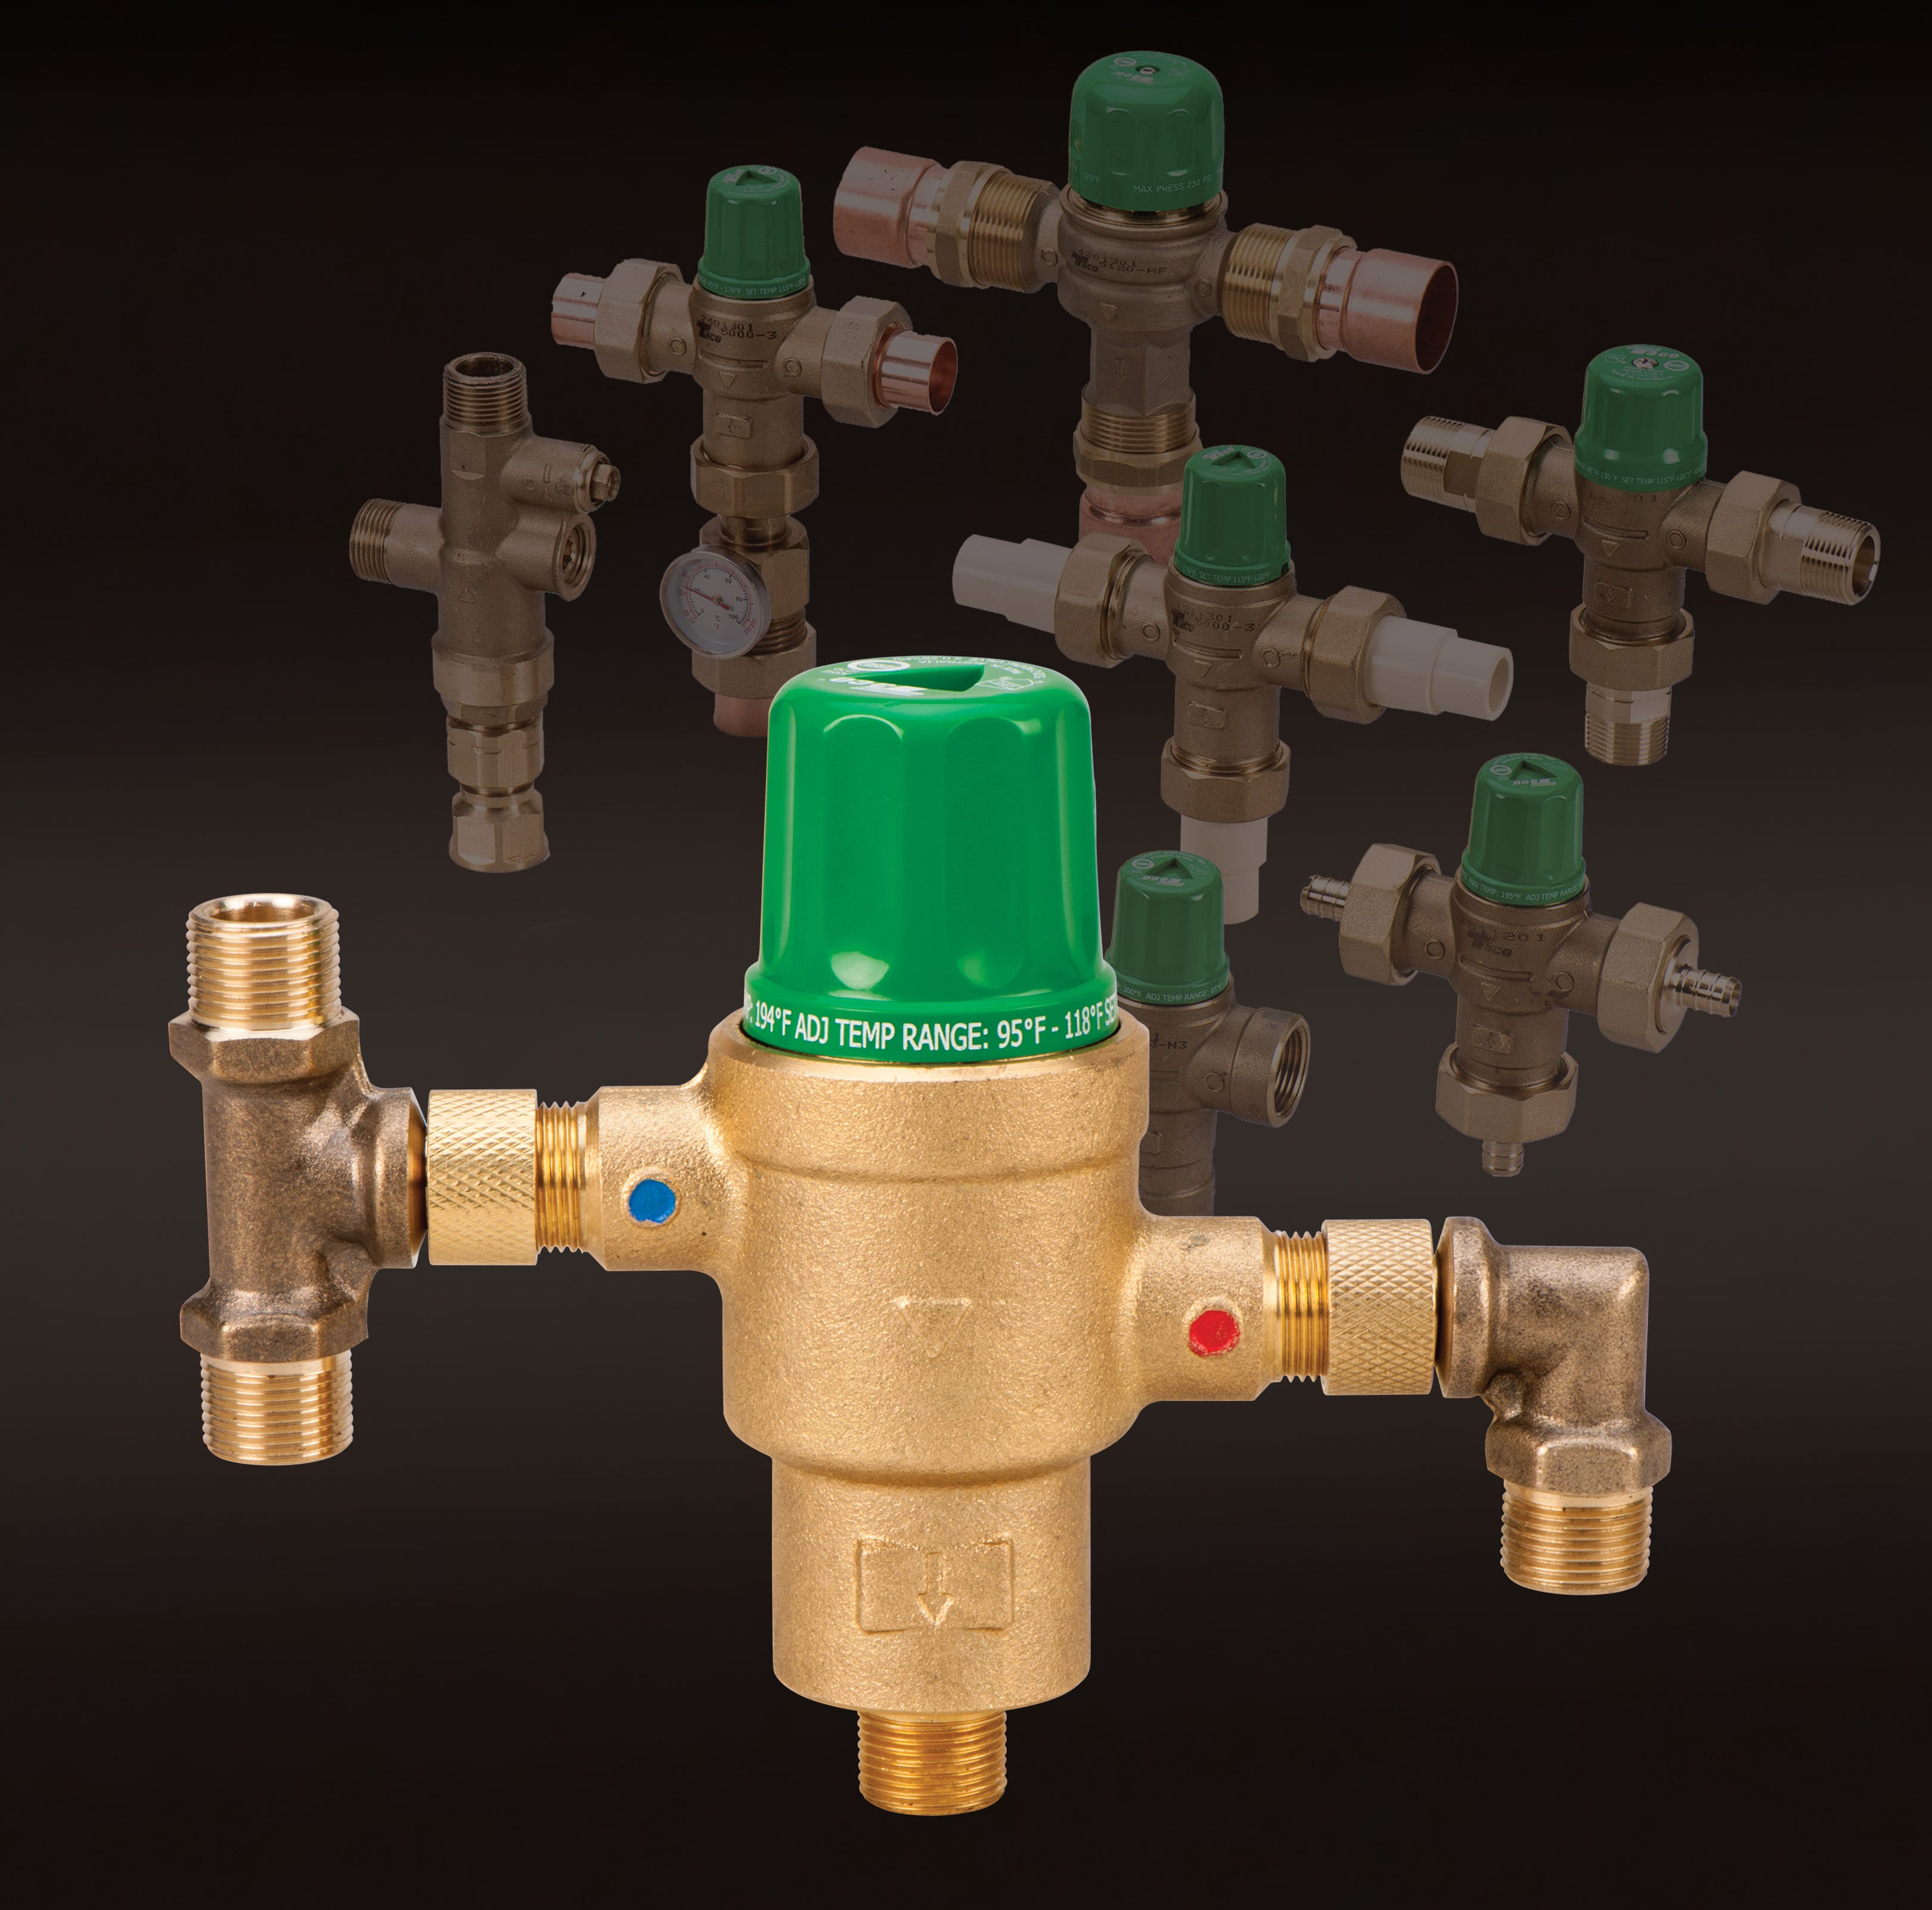 Taco Comfort Solutions Offers the 5121 Thermostatic Mixing Valve for .